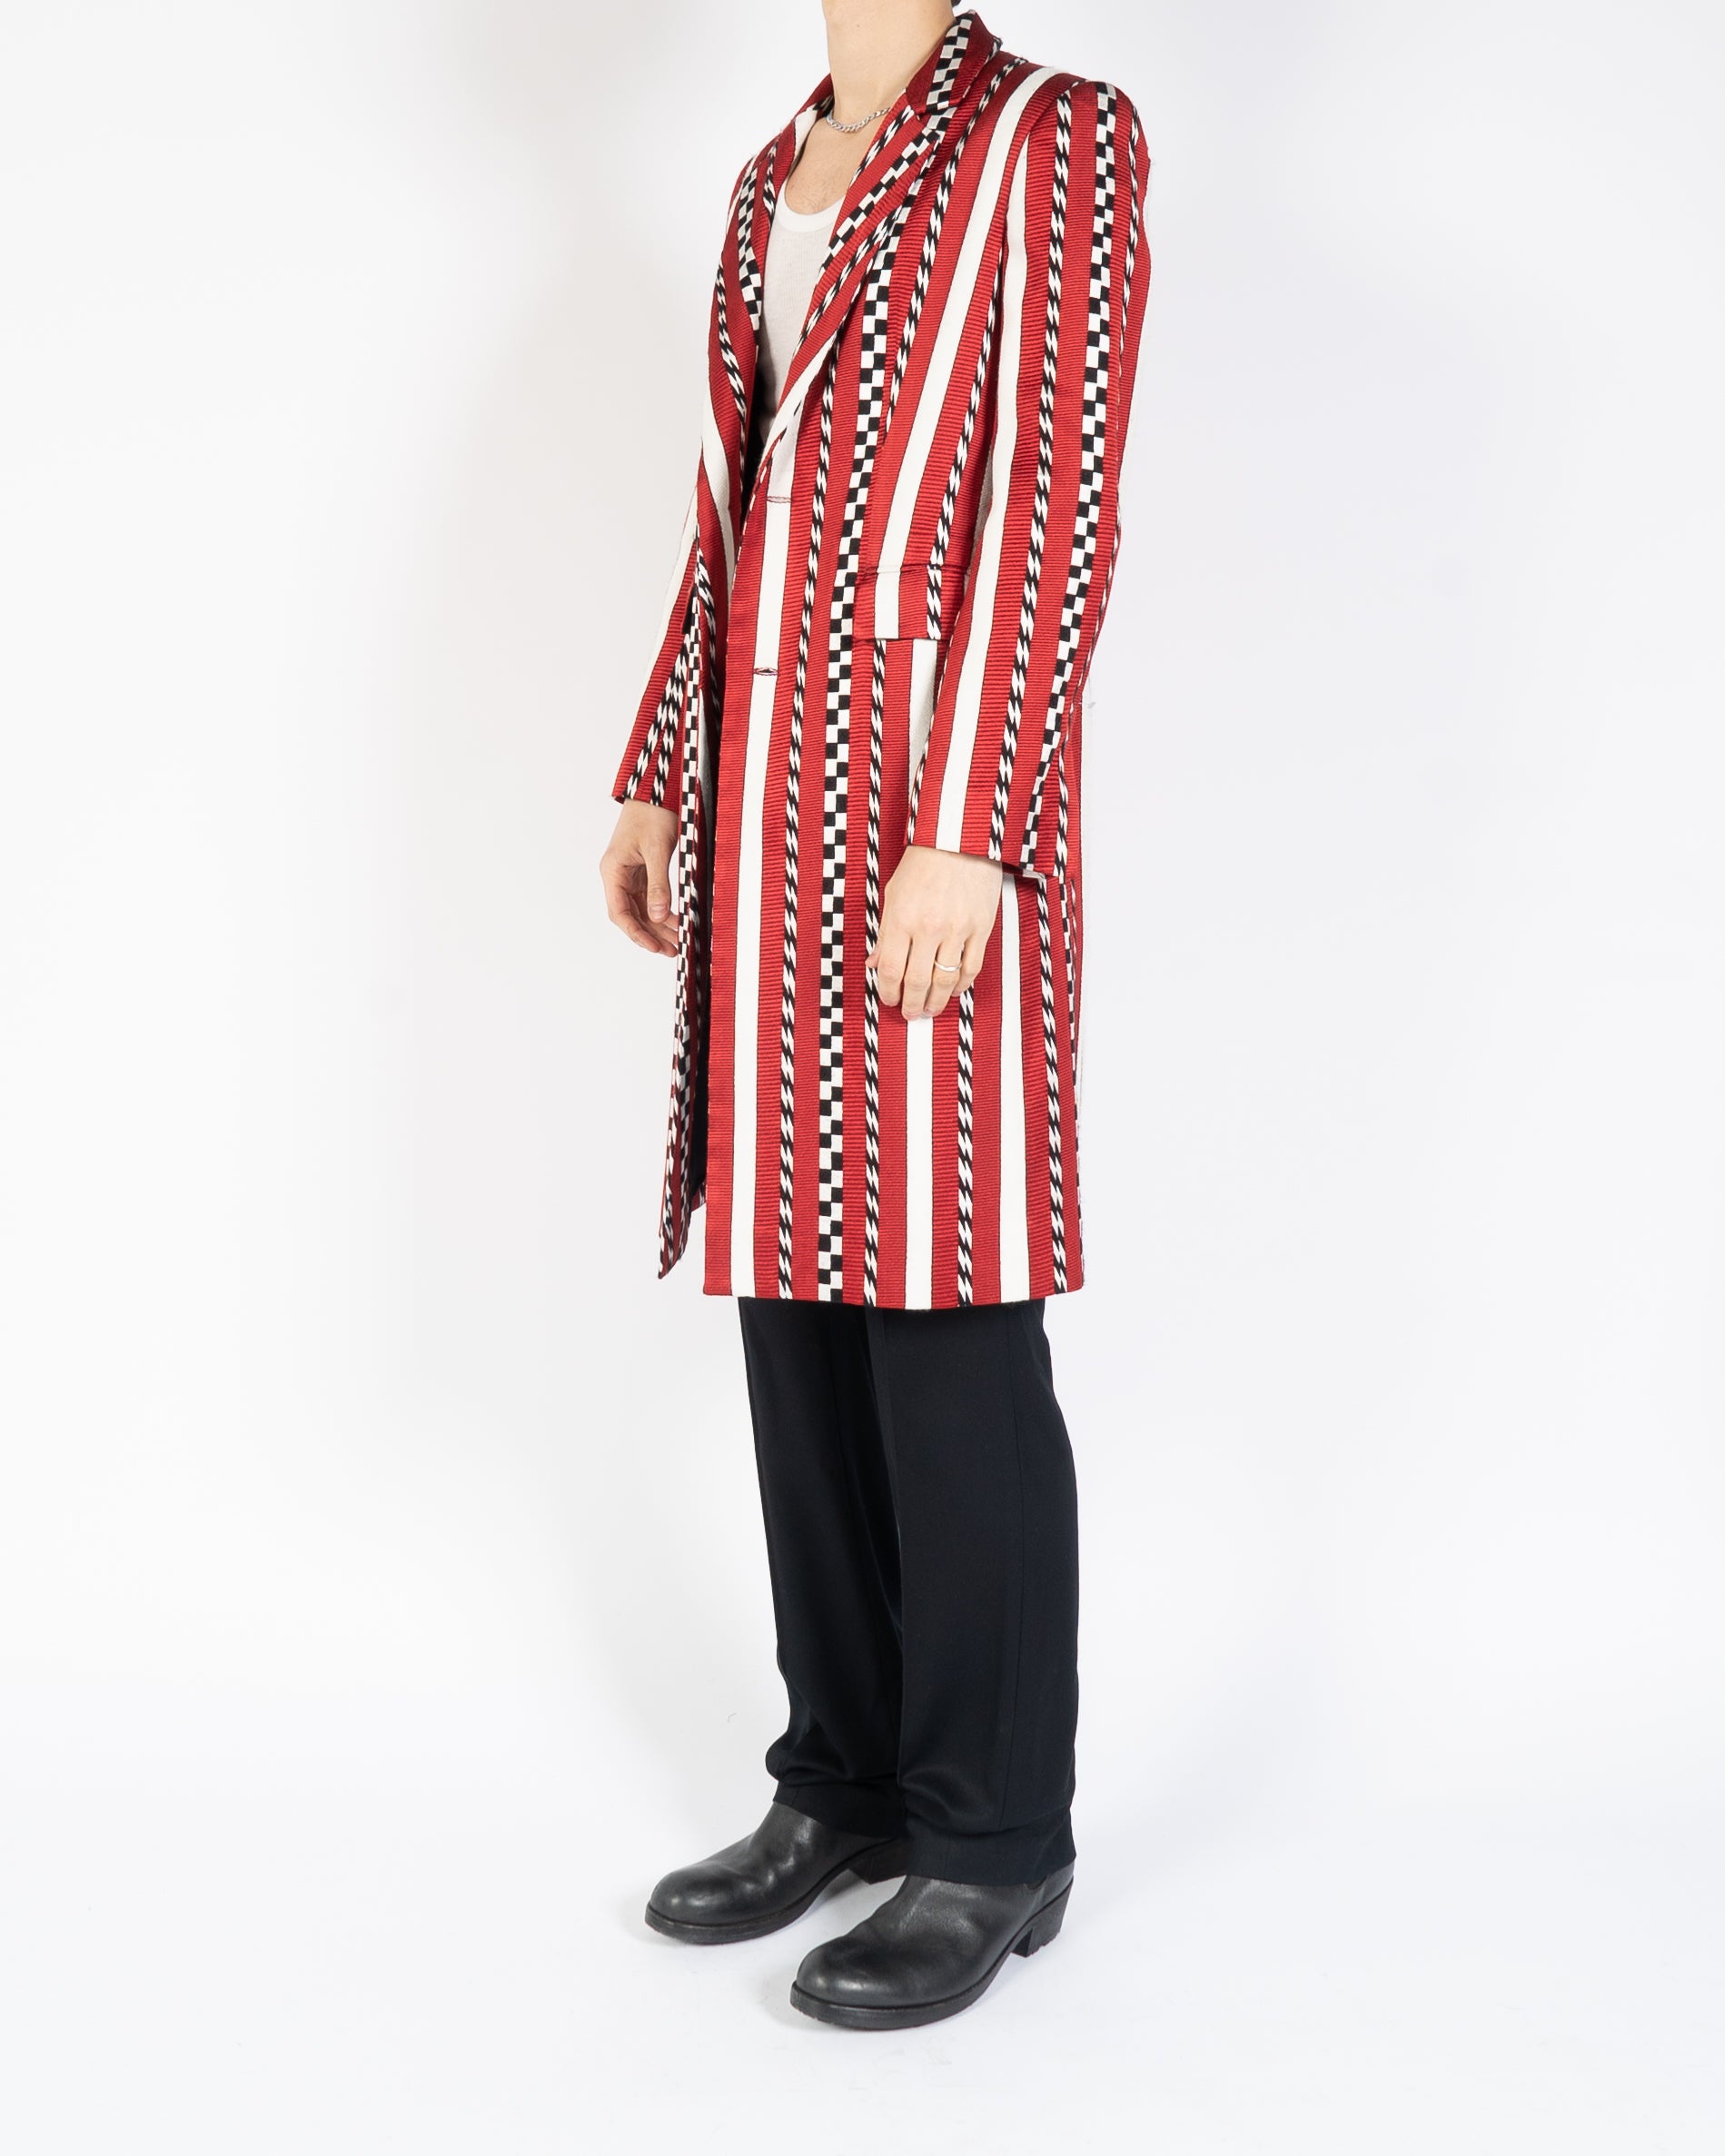 FW19 Red Jacquard Striped Coat